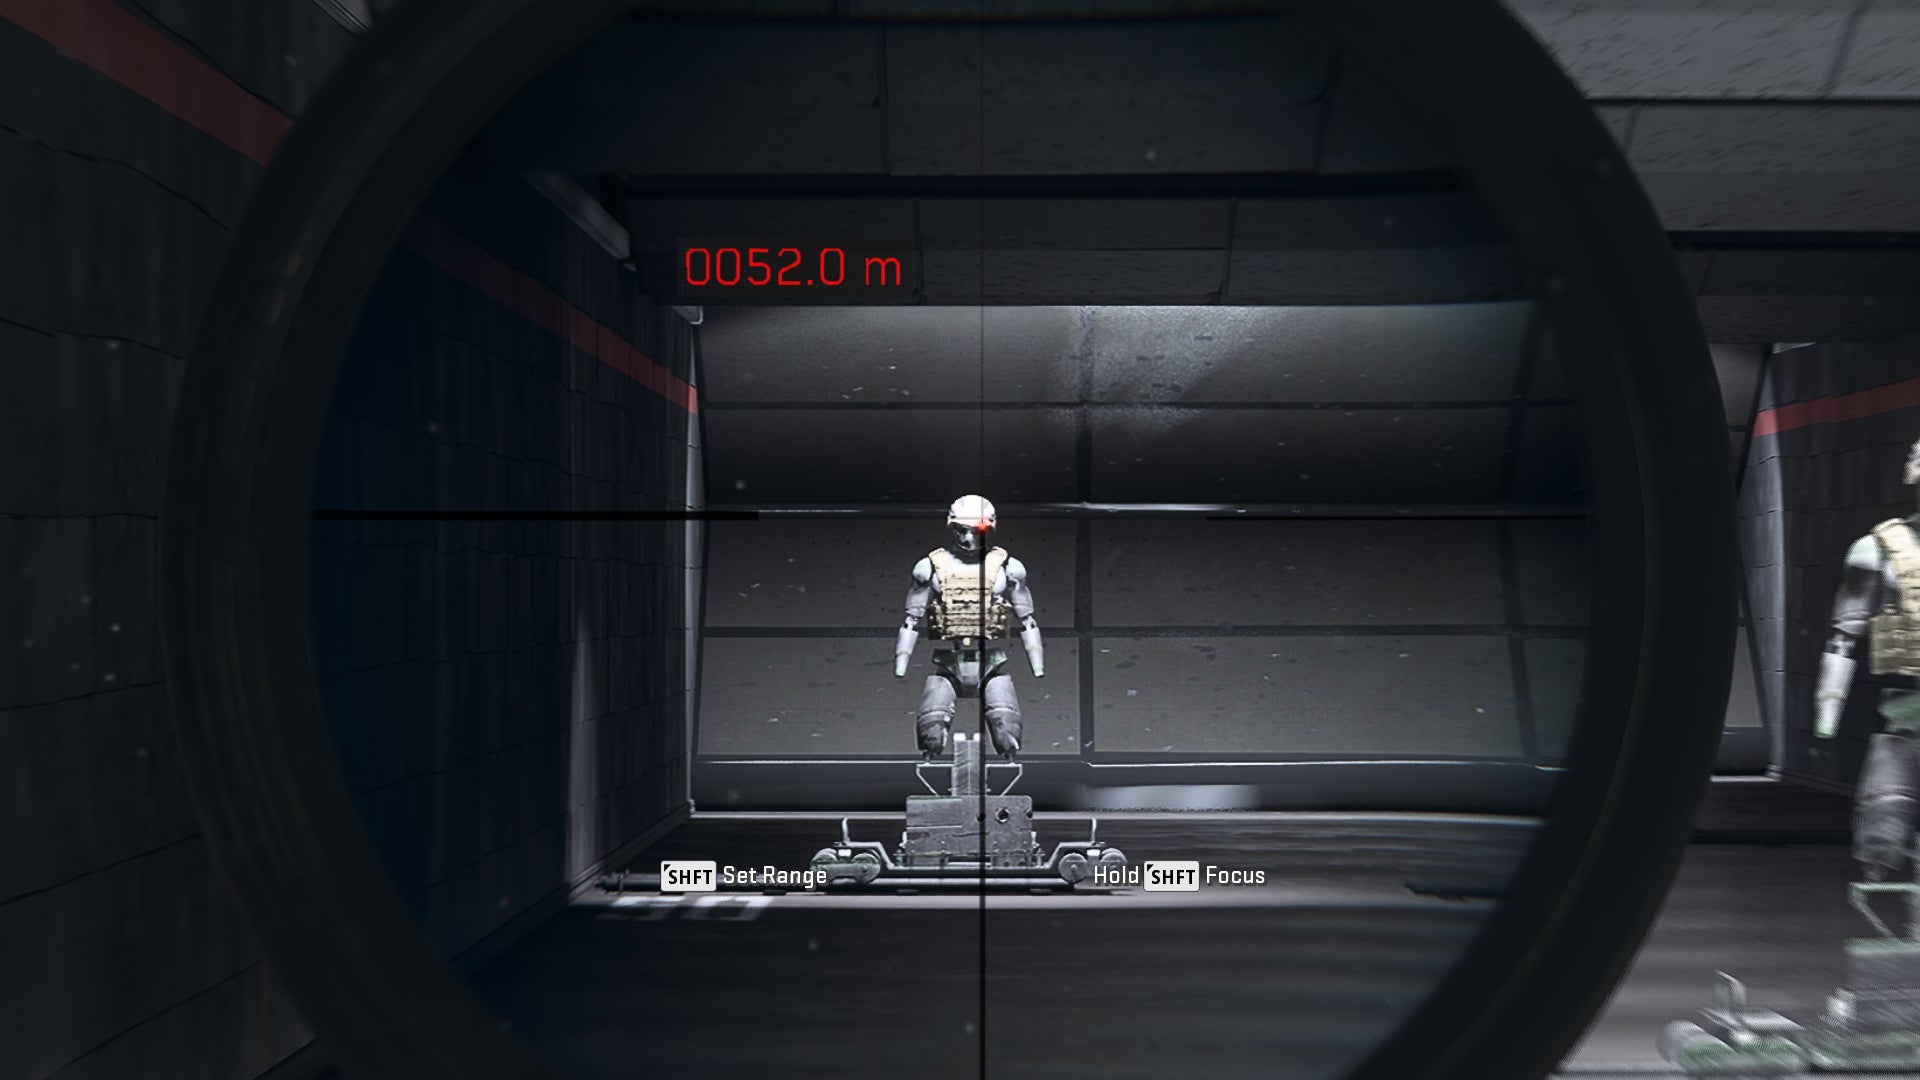 The player in Warzone 2.0 aims at a training dummy using the Raptor FVM40 optic attachment.